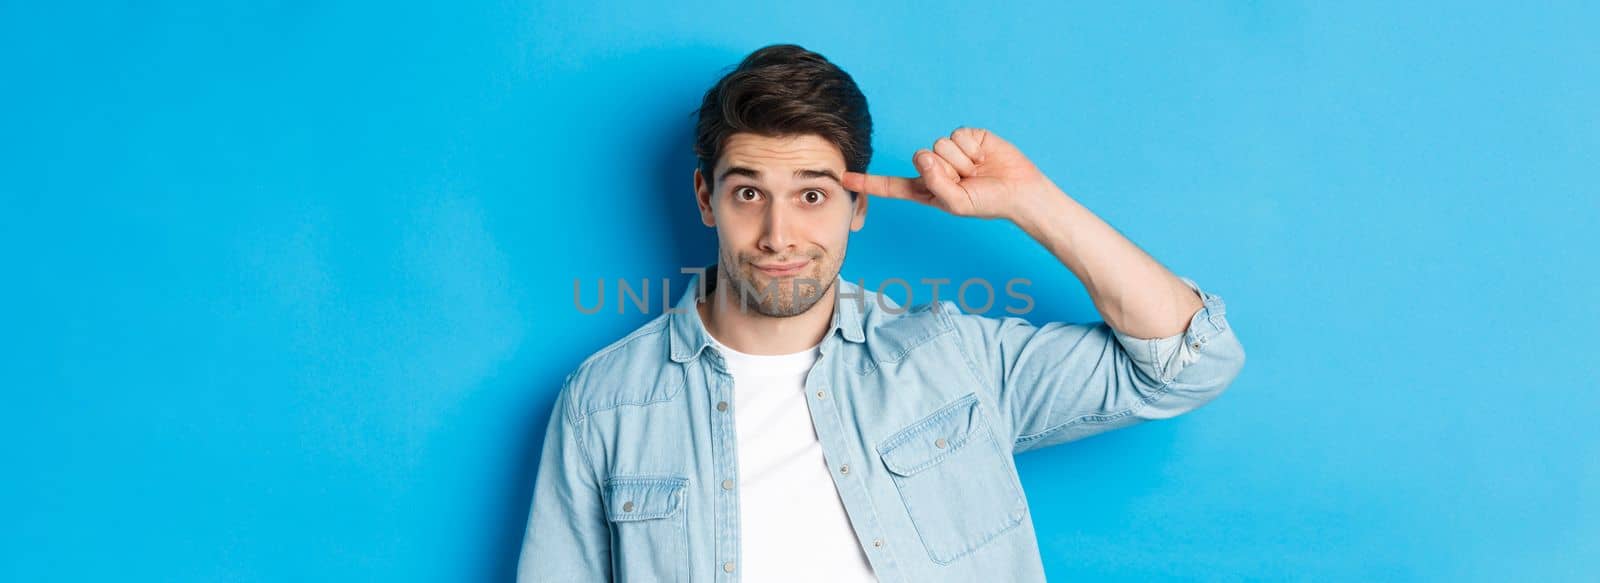 Close-up of man scolding for acting stupid or crazy, rolling finger on head and looking at camera, standing over blue background.